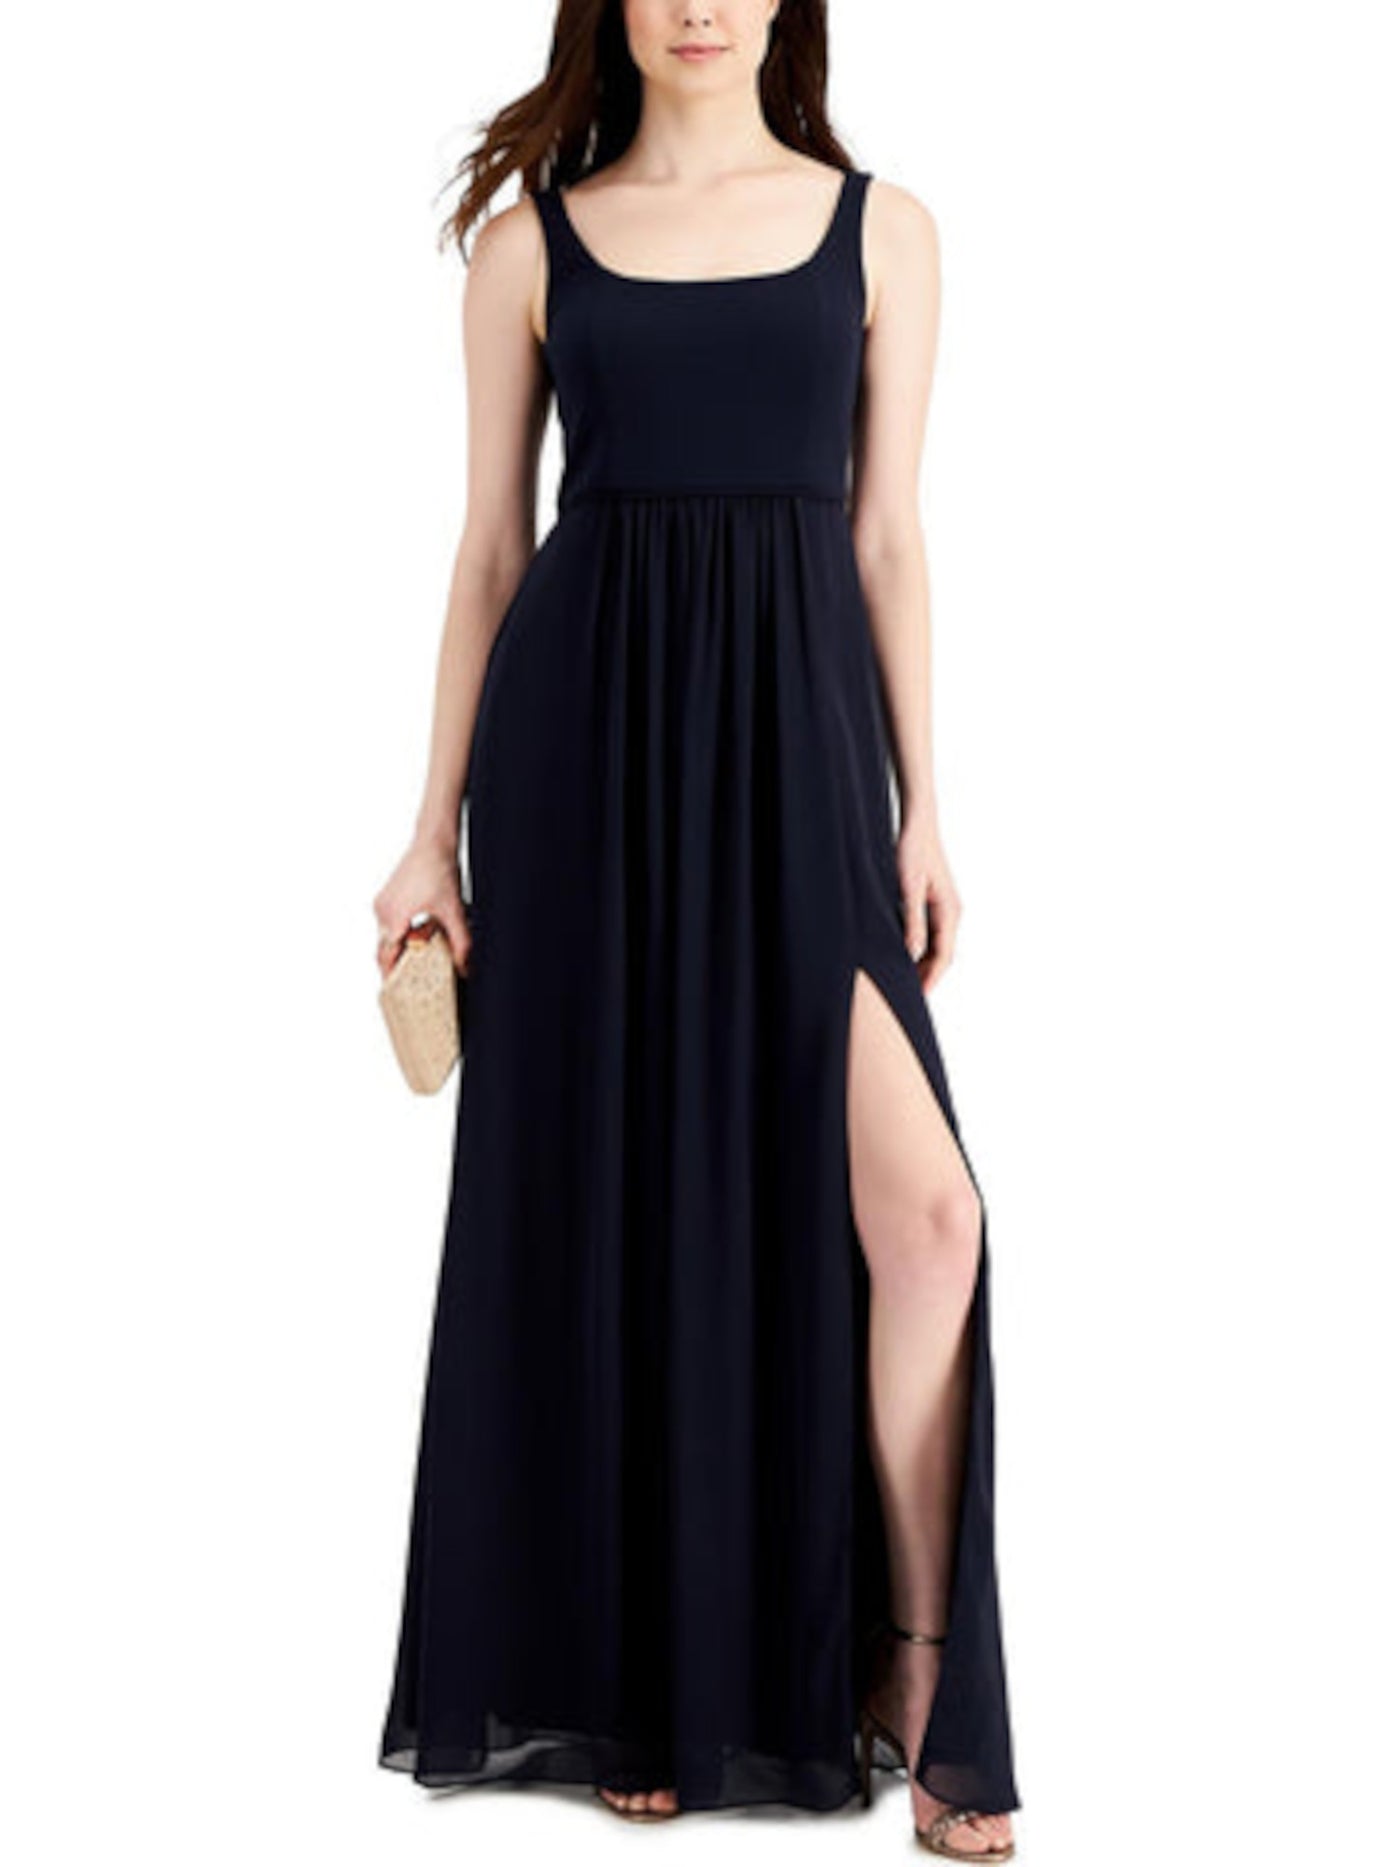 ADRIANNA PAPELL Womens Navy Zippered Slitted Gathered Pleated Lined Sheer Sleeveless Square Neck Full-Length Evening Gown Dress 6